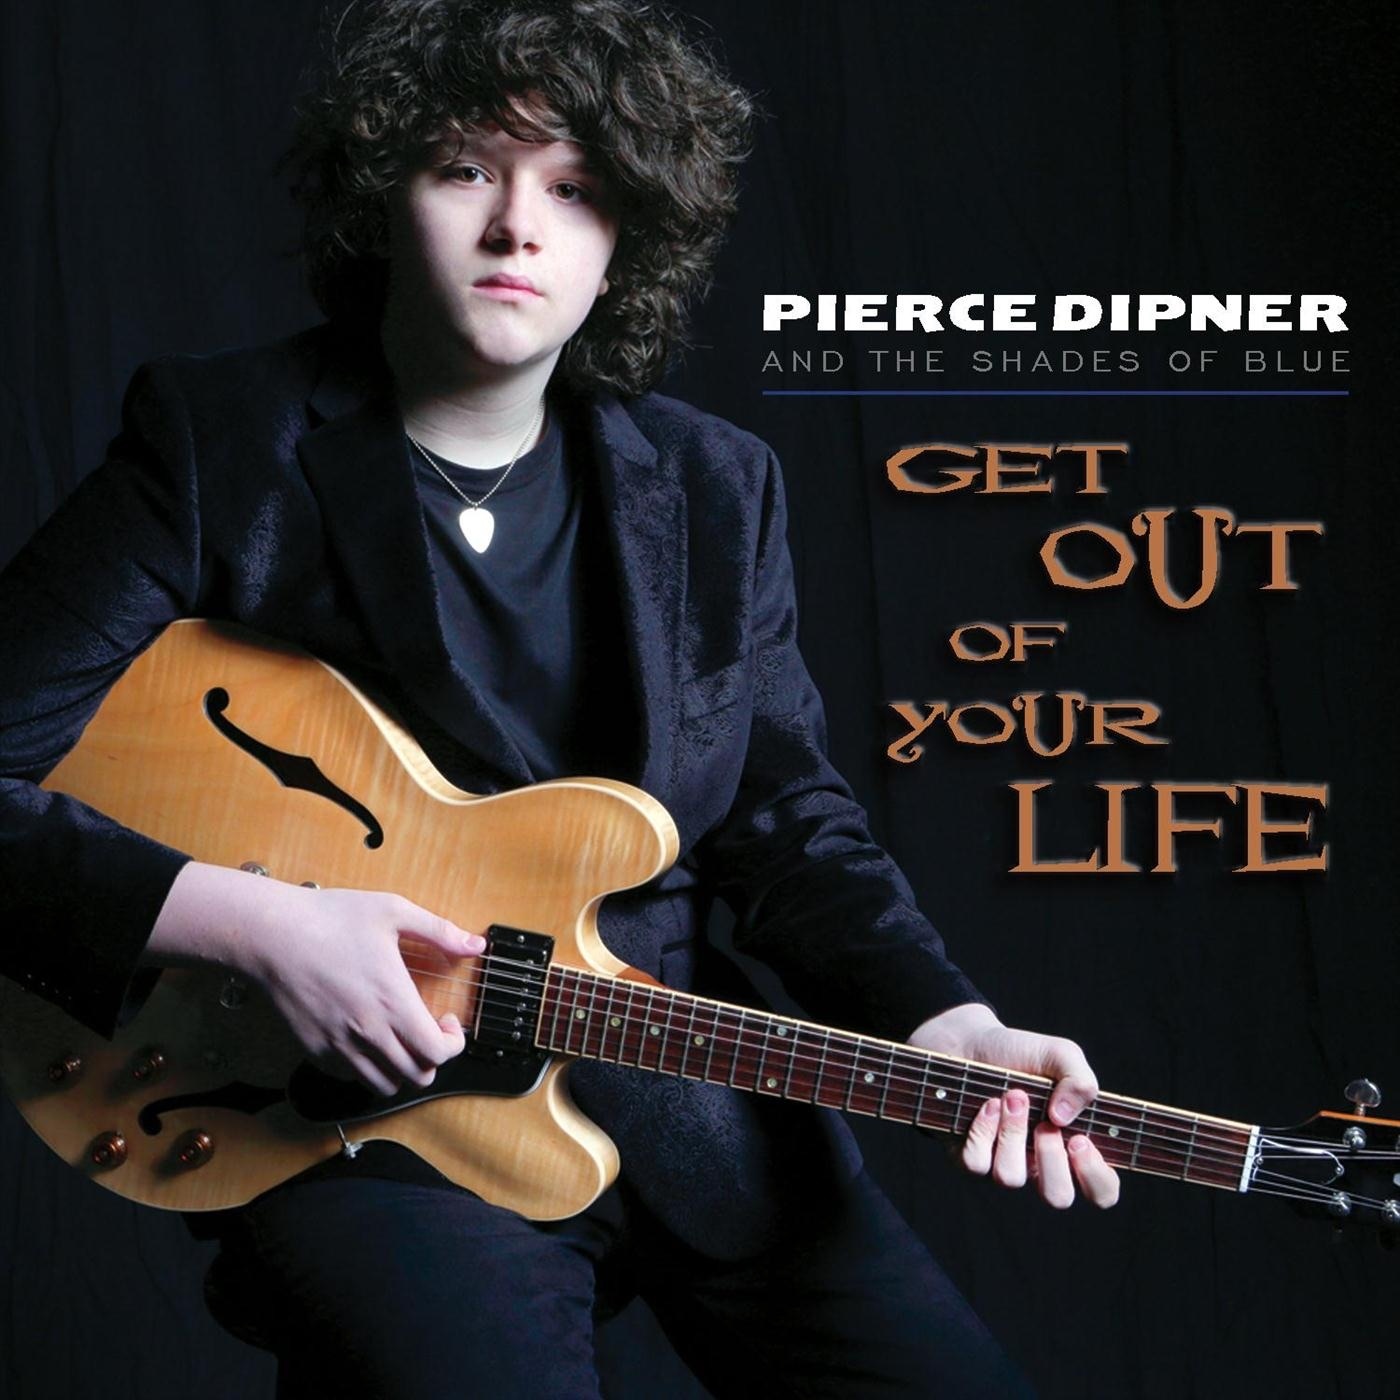 Art for Get out of Your Life by Pierce Dipner and the Shades of Blue